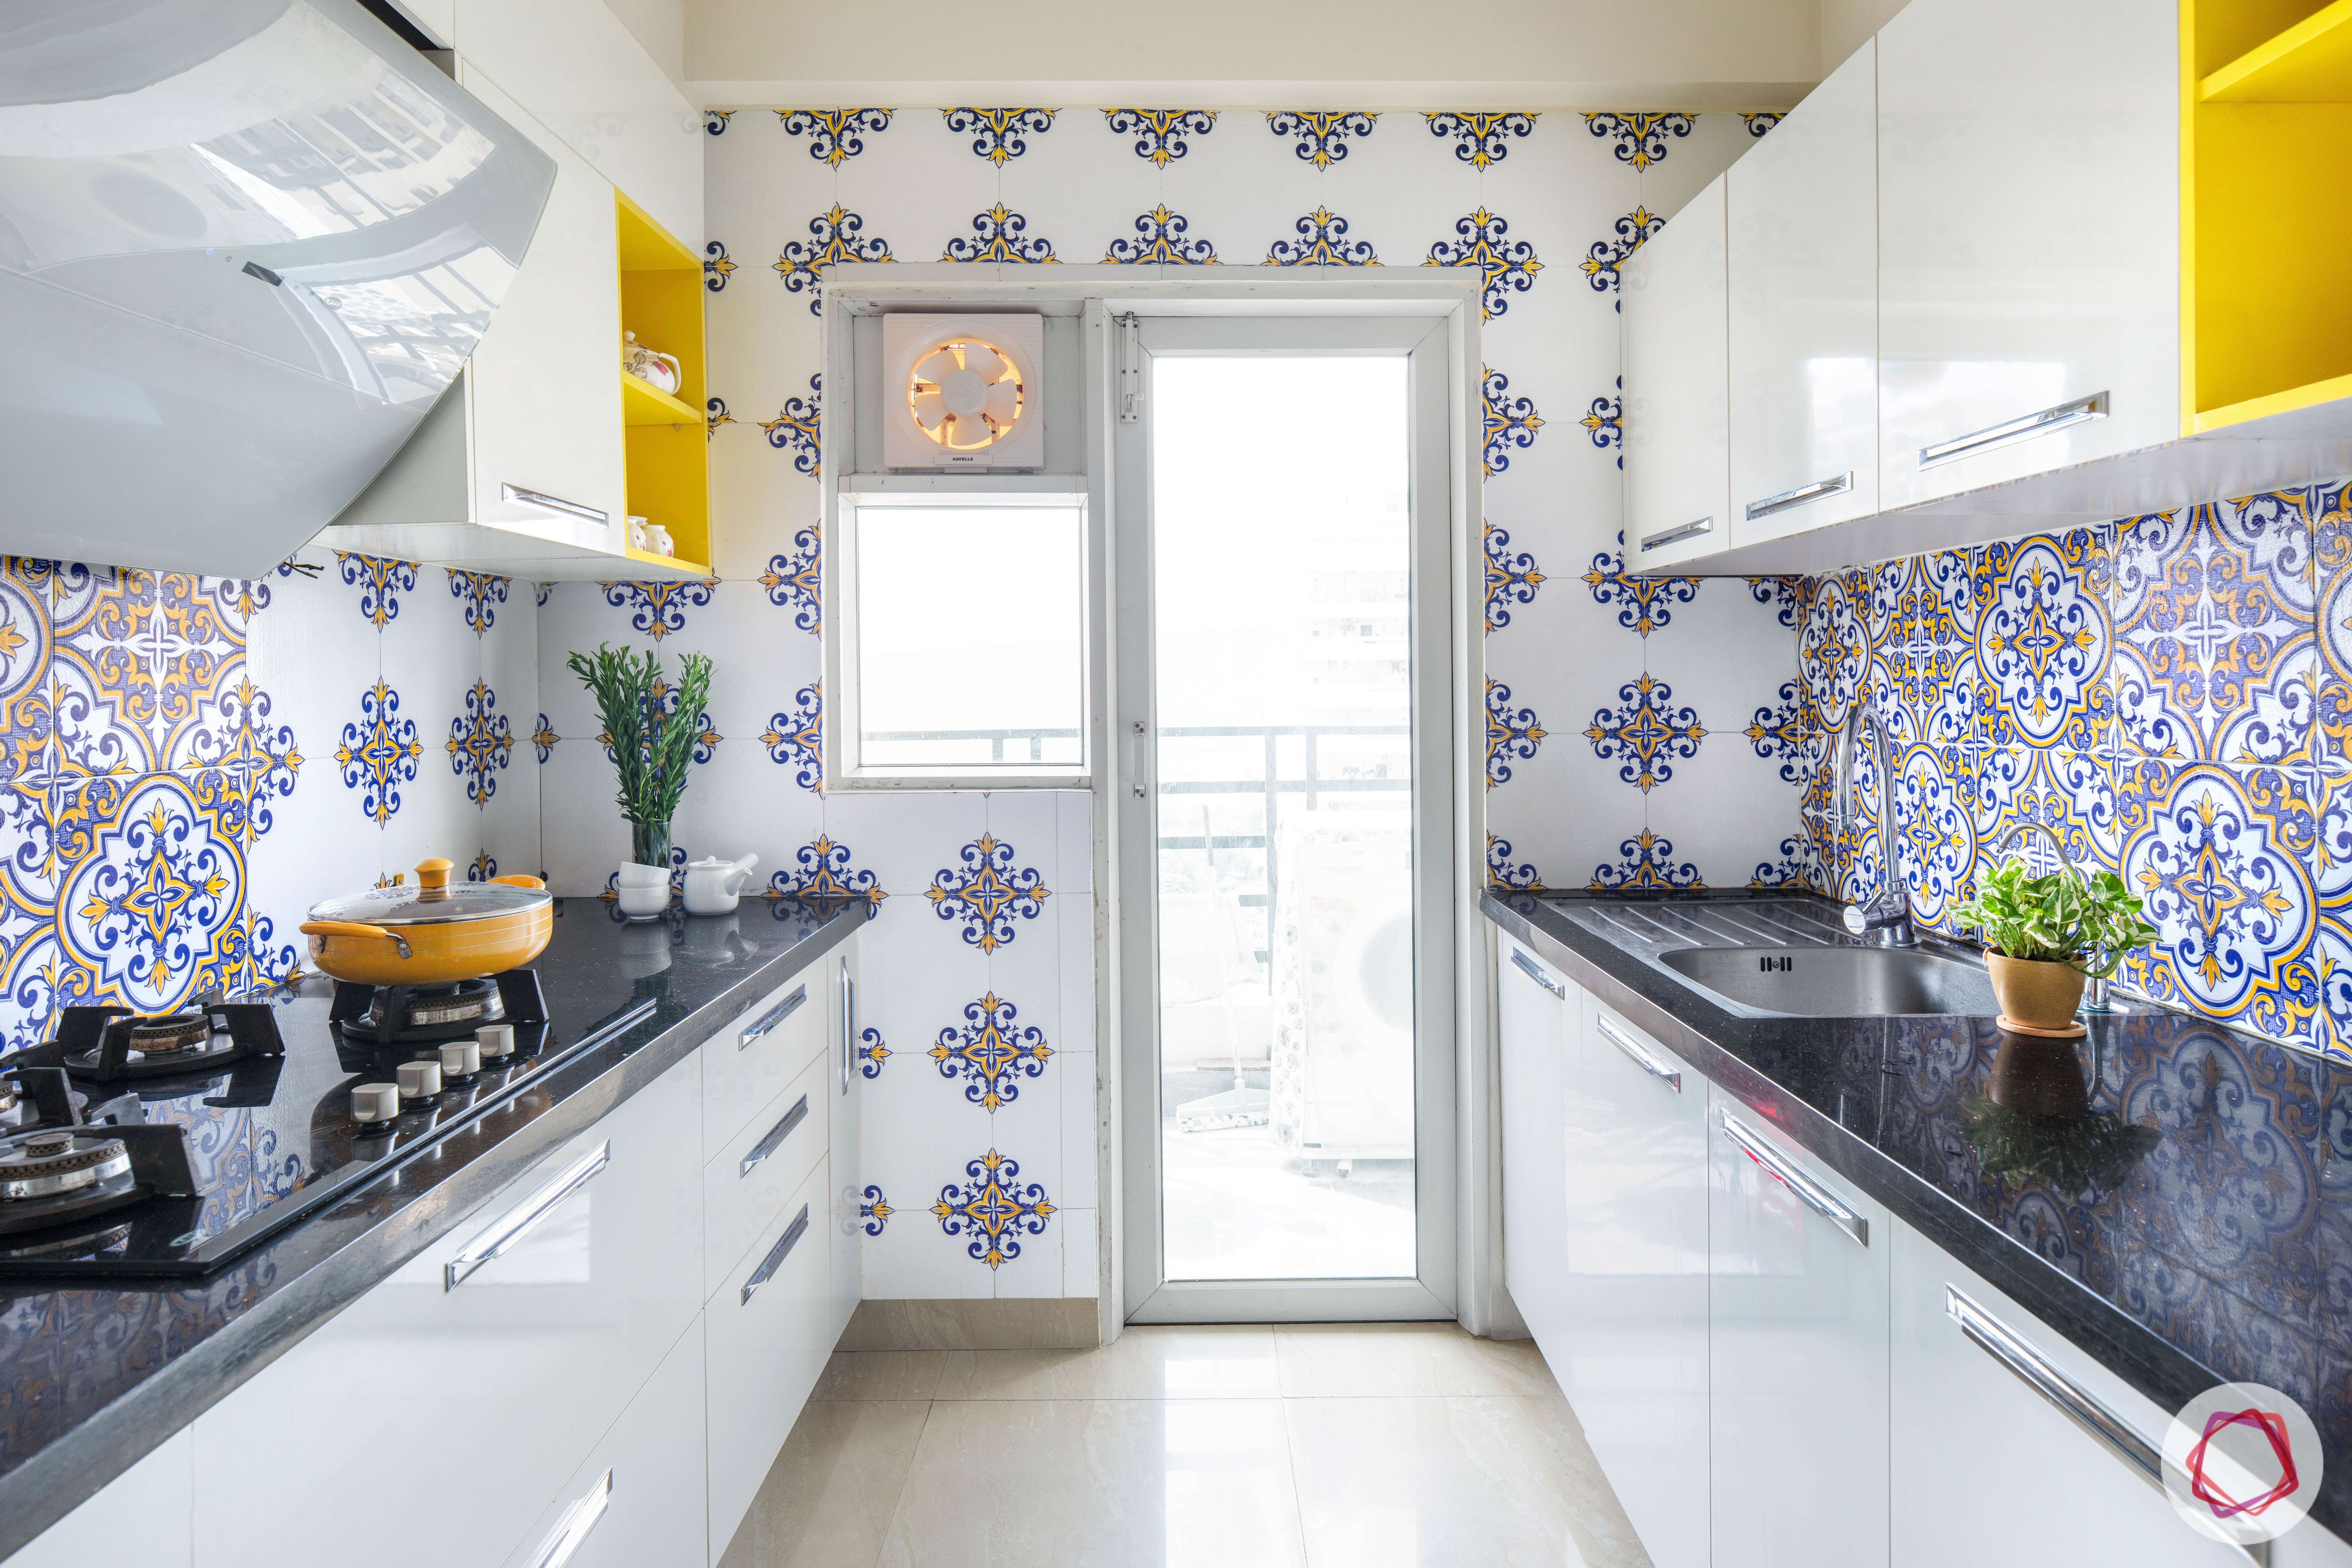 Give Your Kitchen a New Look With These 25 Splendid Backsplash Ideas